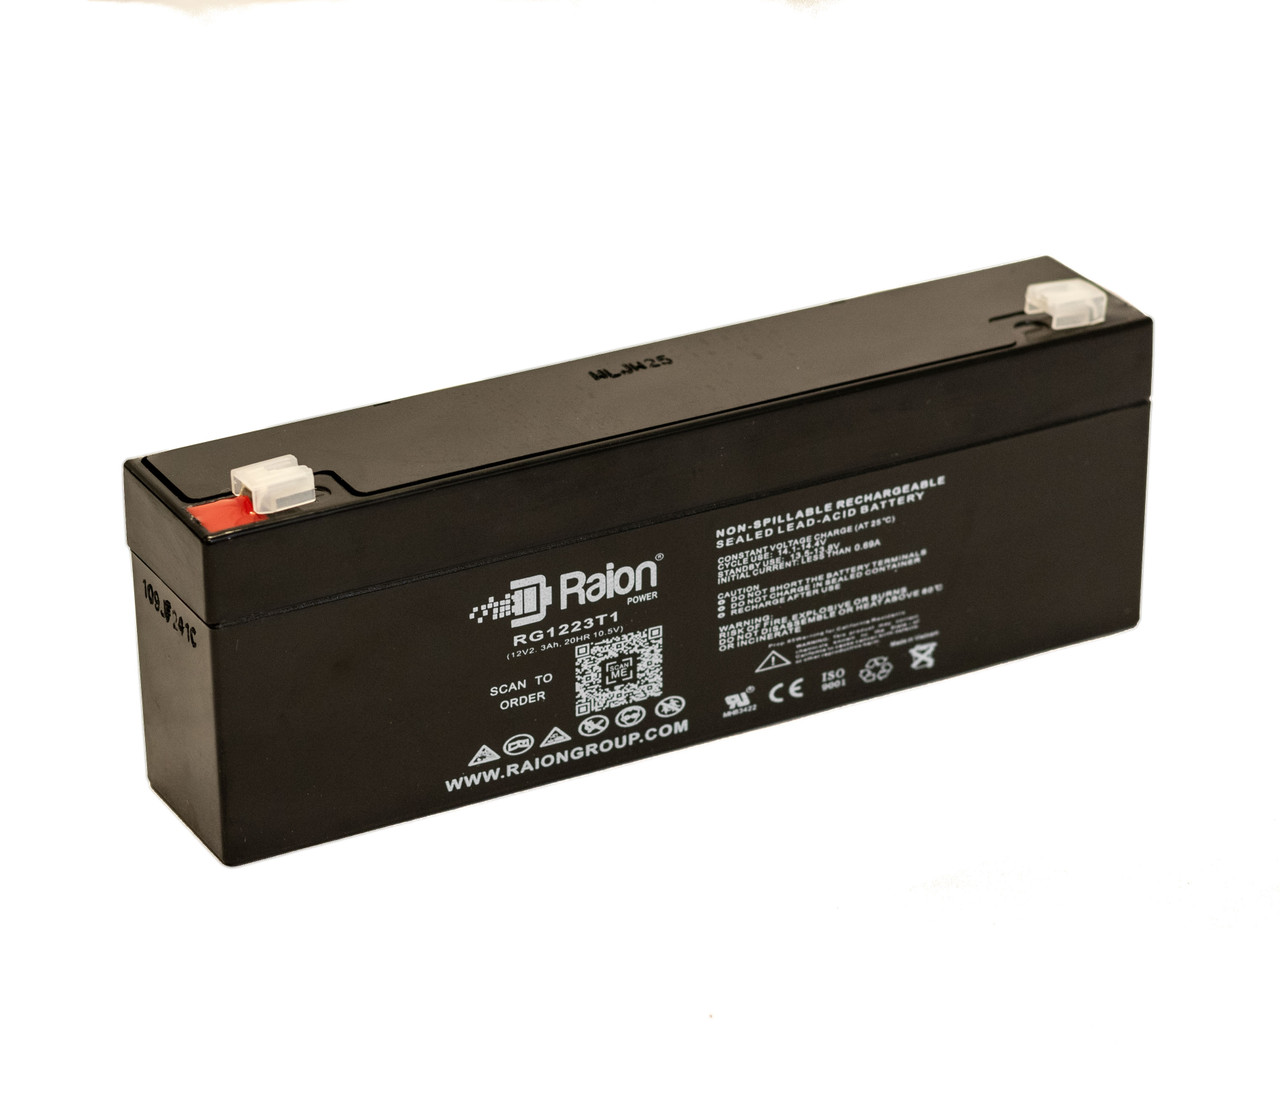 Raion Power RG1223T1 Replacement Battery for Gaston GT12-2.2W